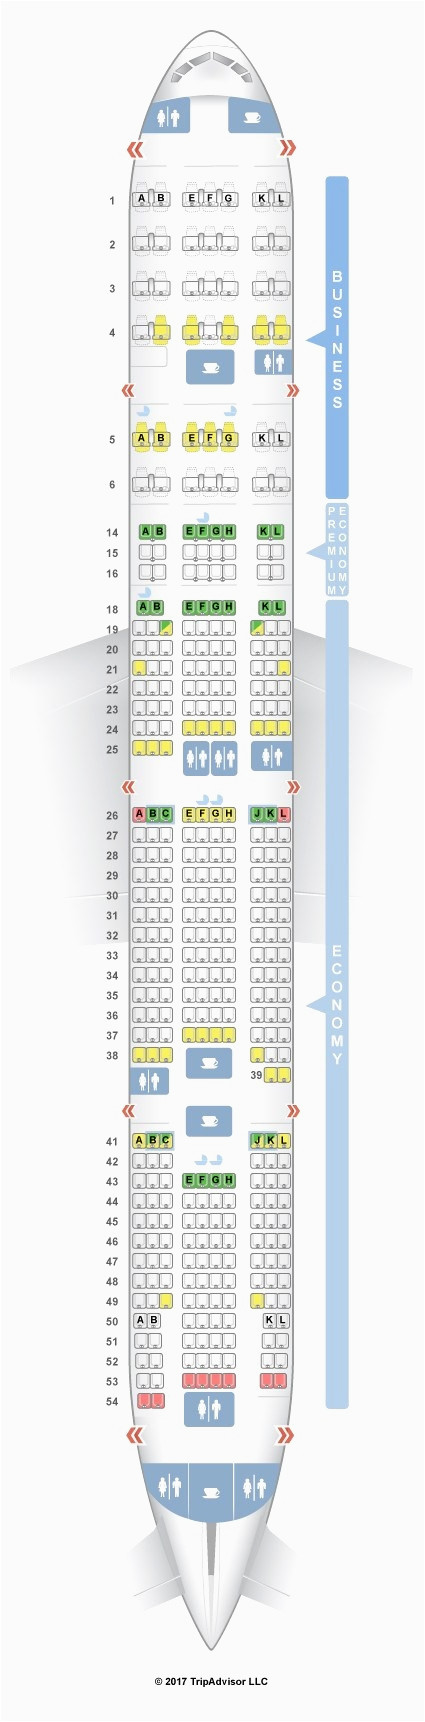 air canada aircraft 777 seating plan the best picture